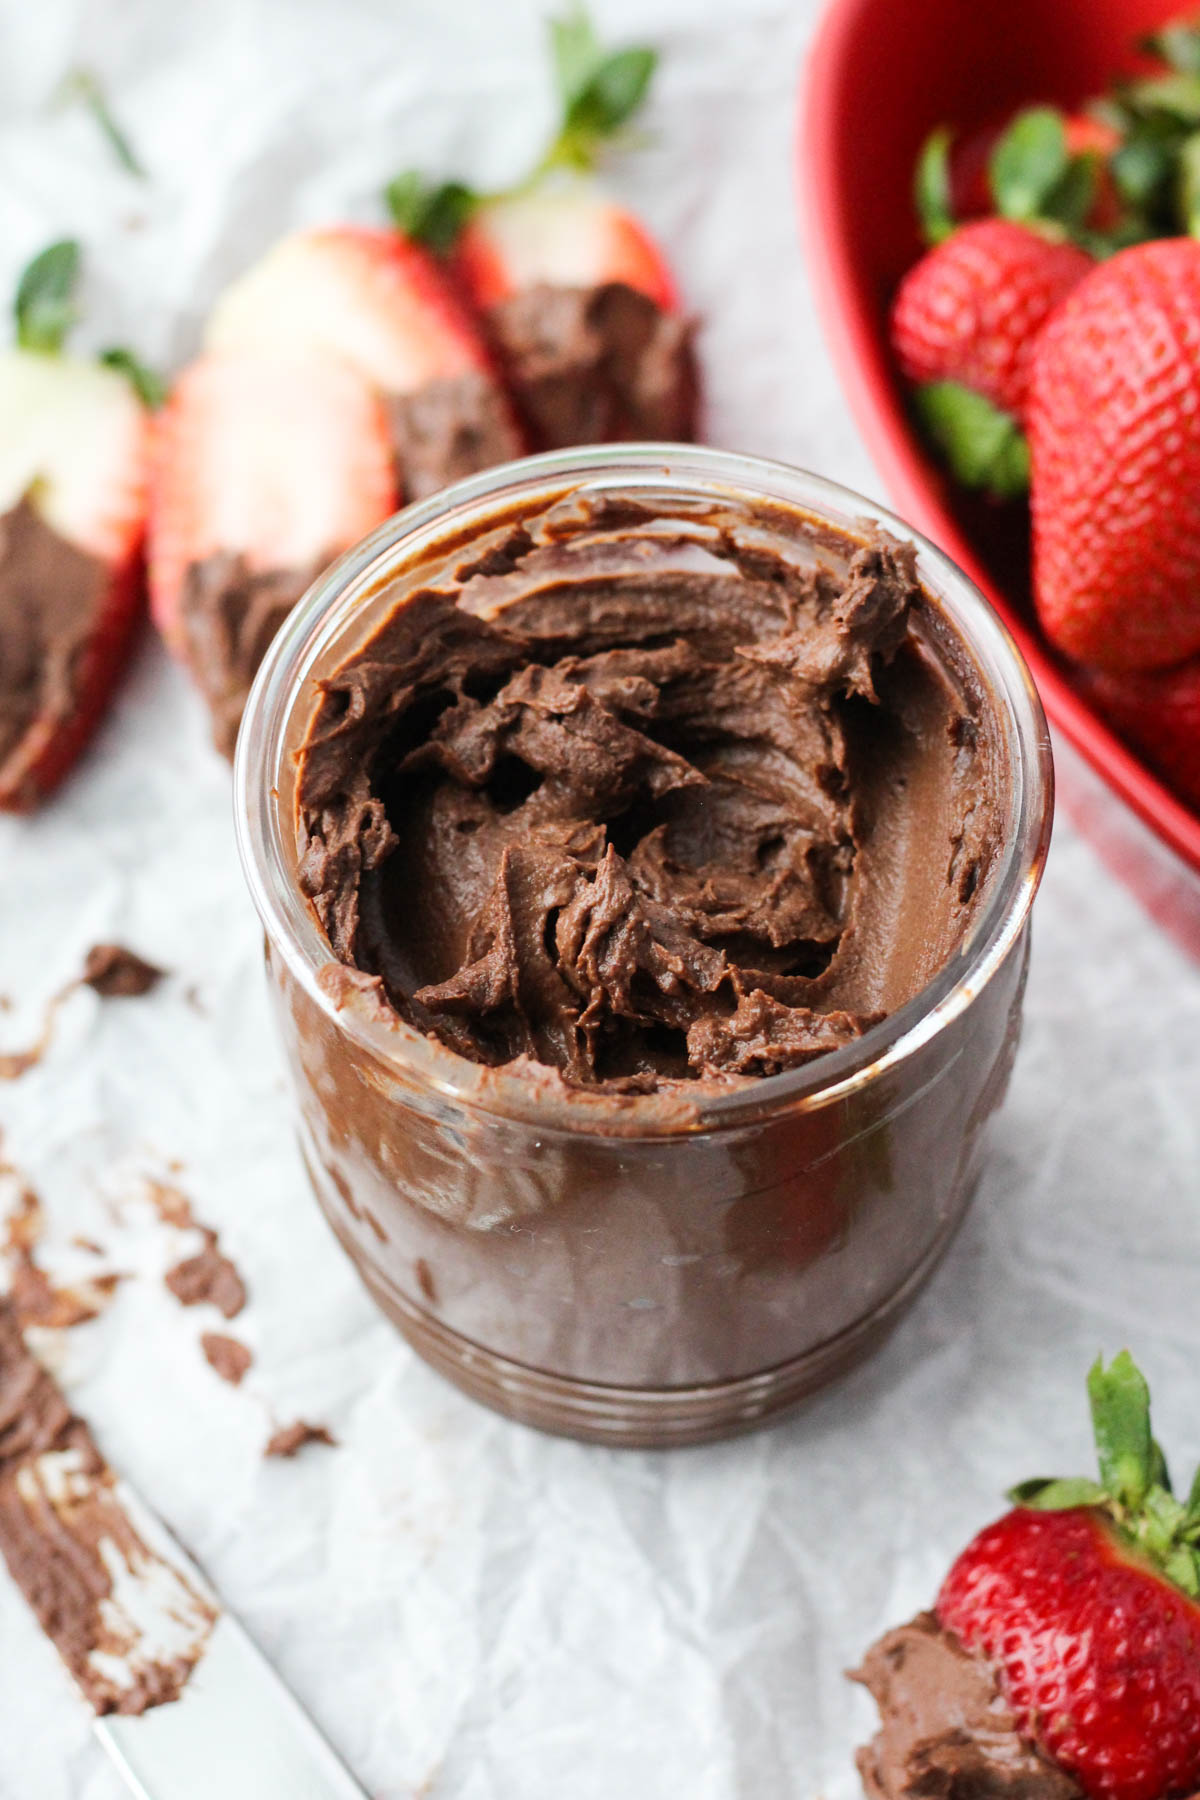 Super thick and creamy nut free chocolate spread in a glass mason jar.